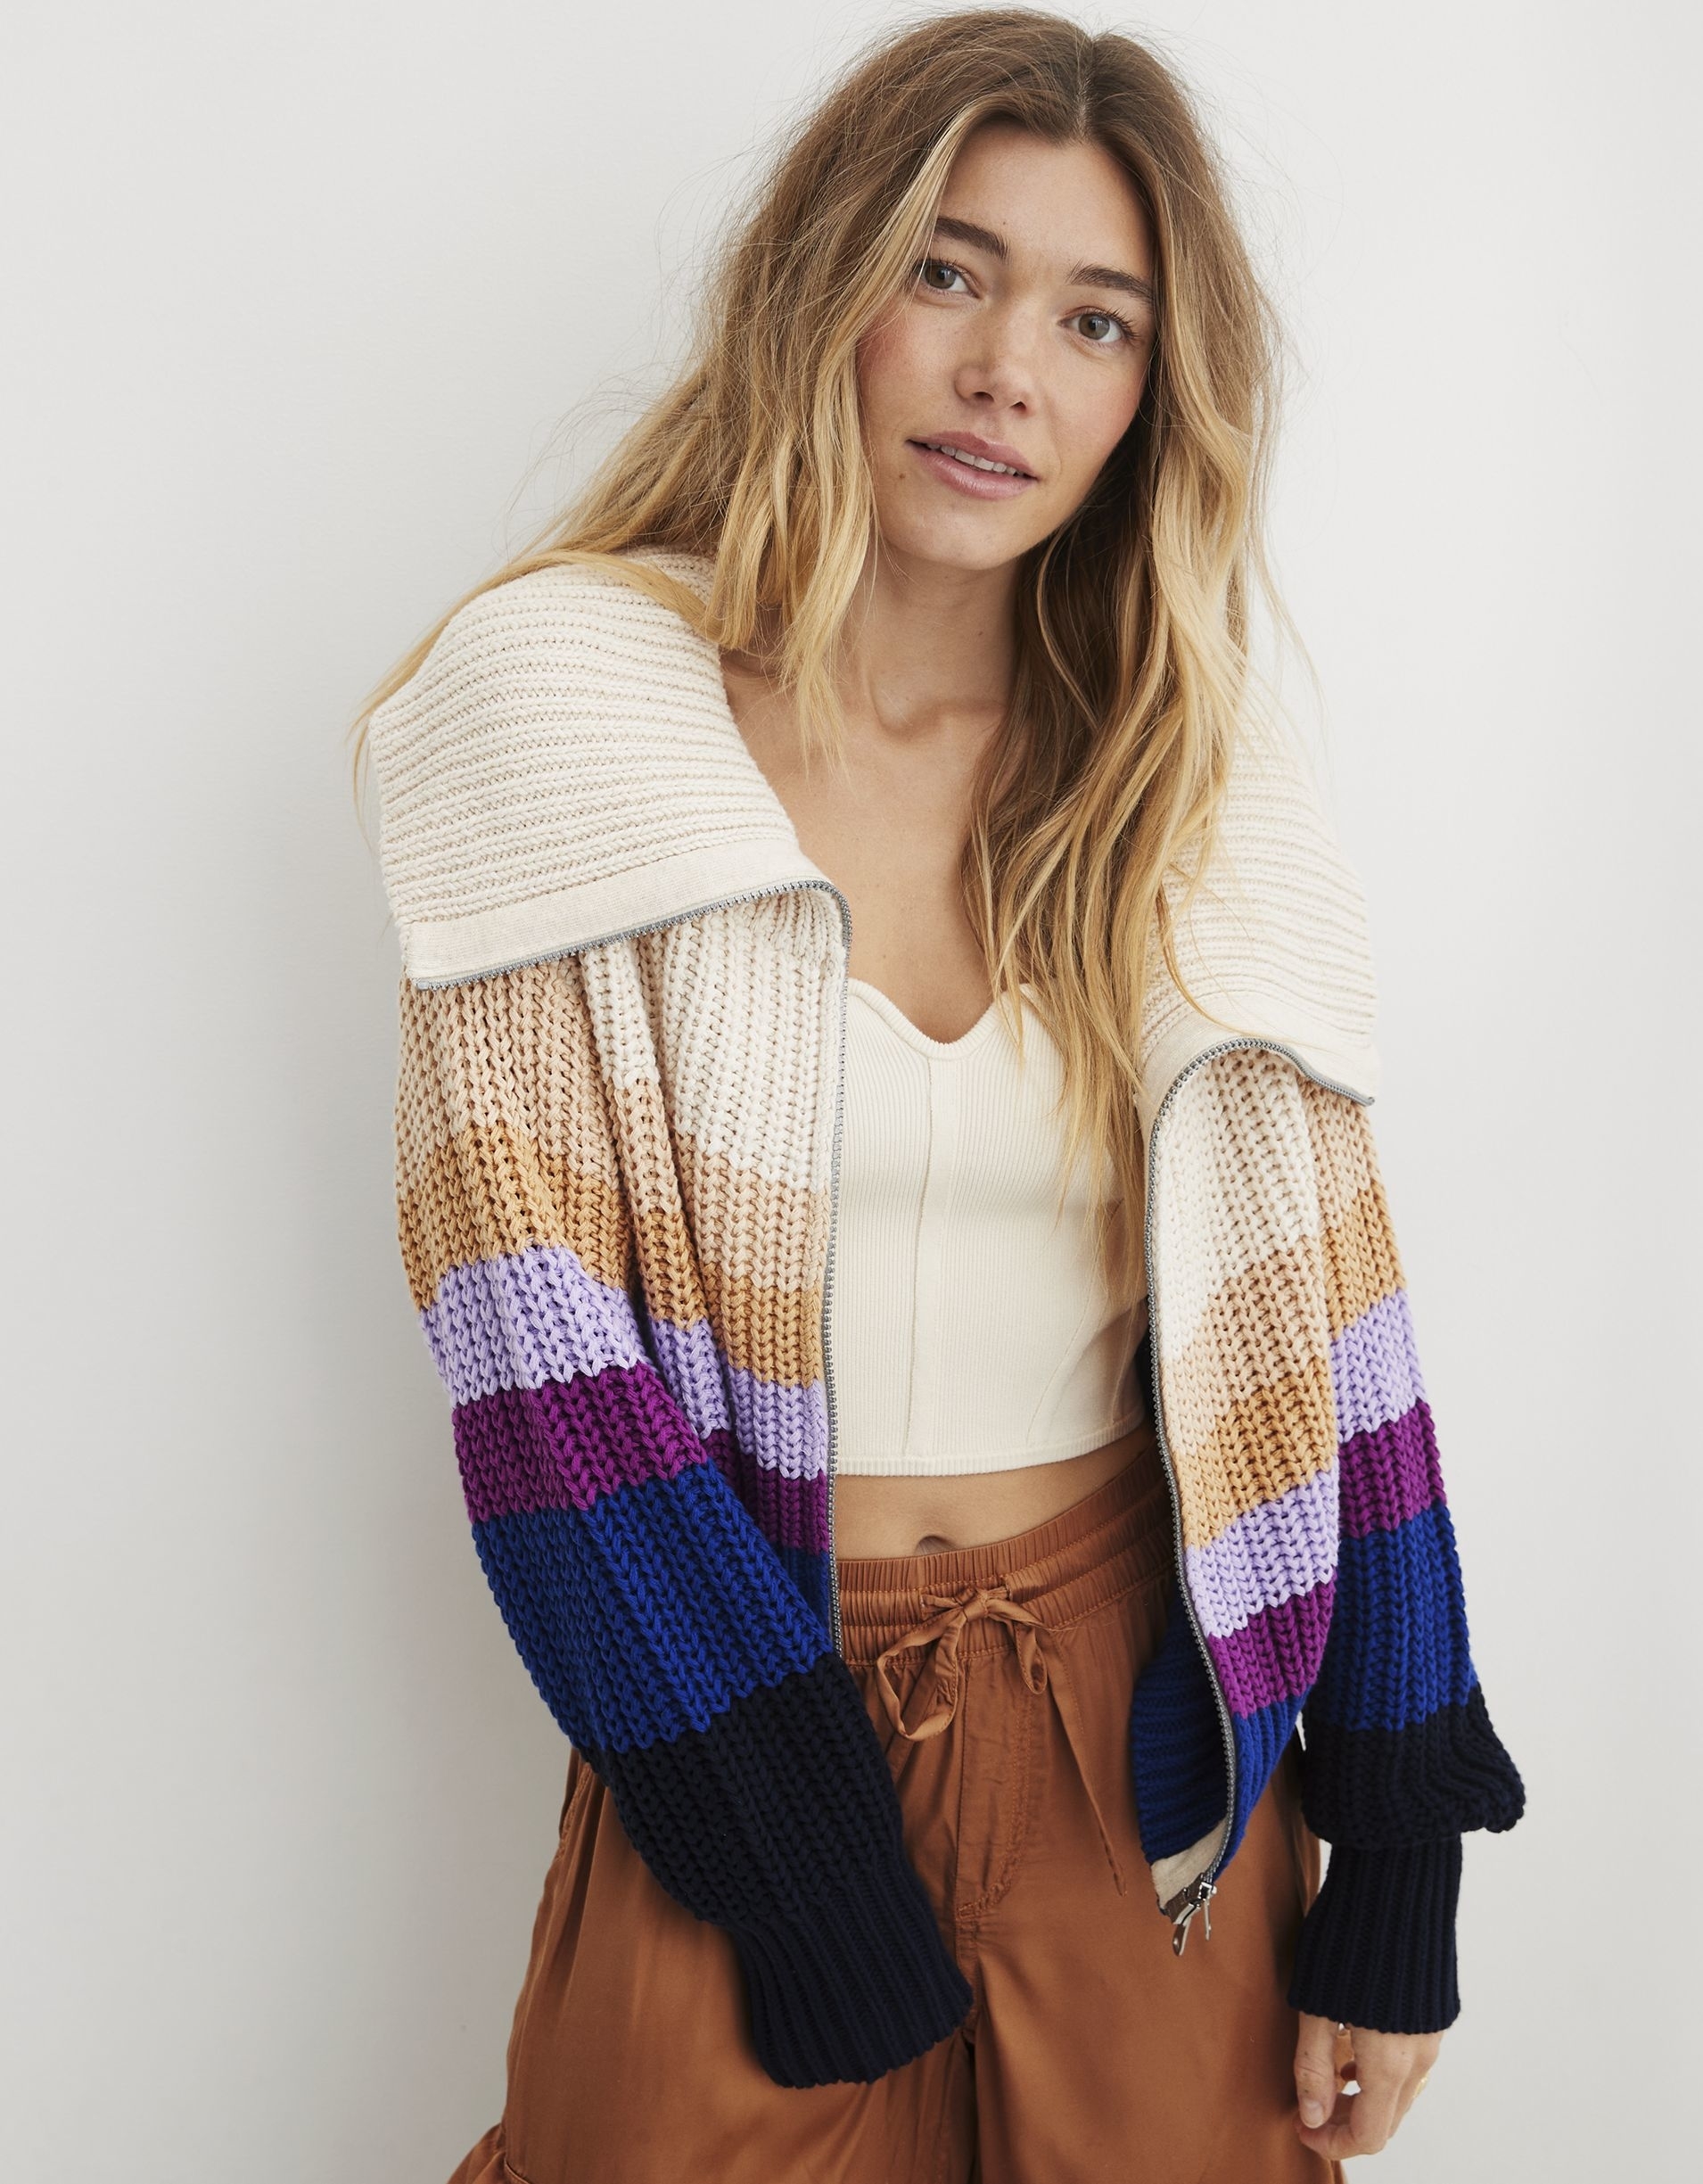 A model wearing the sweater with stripes